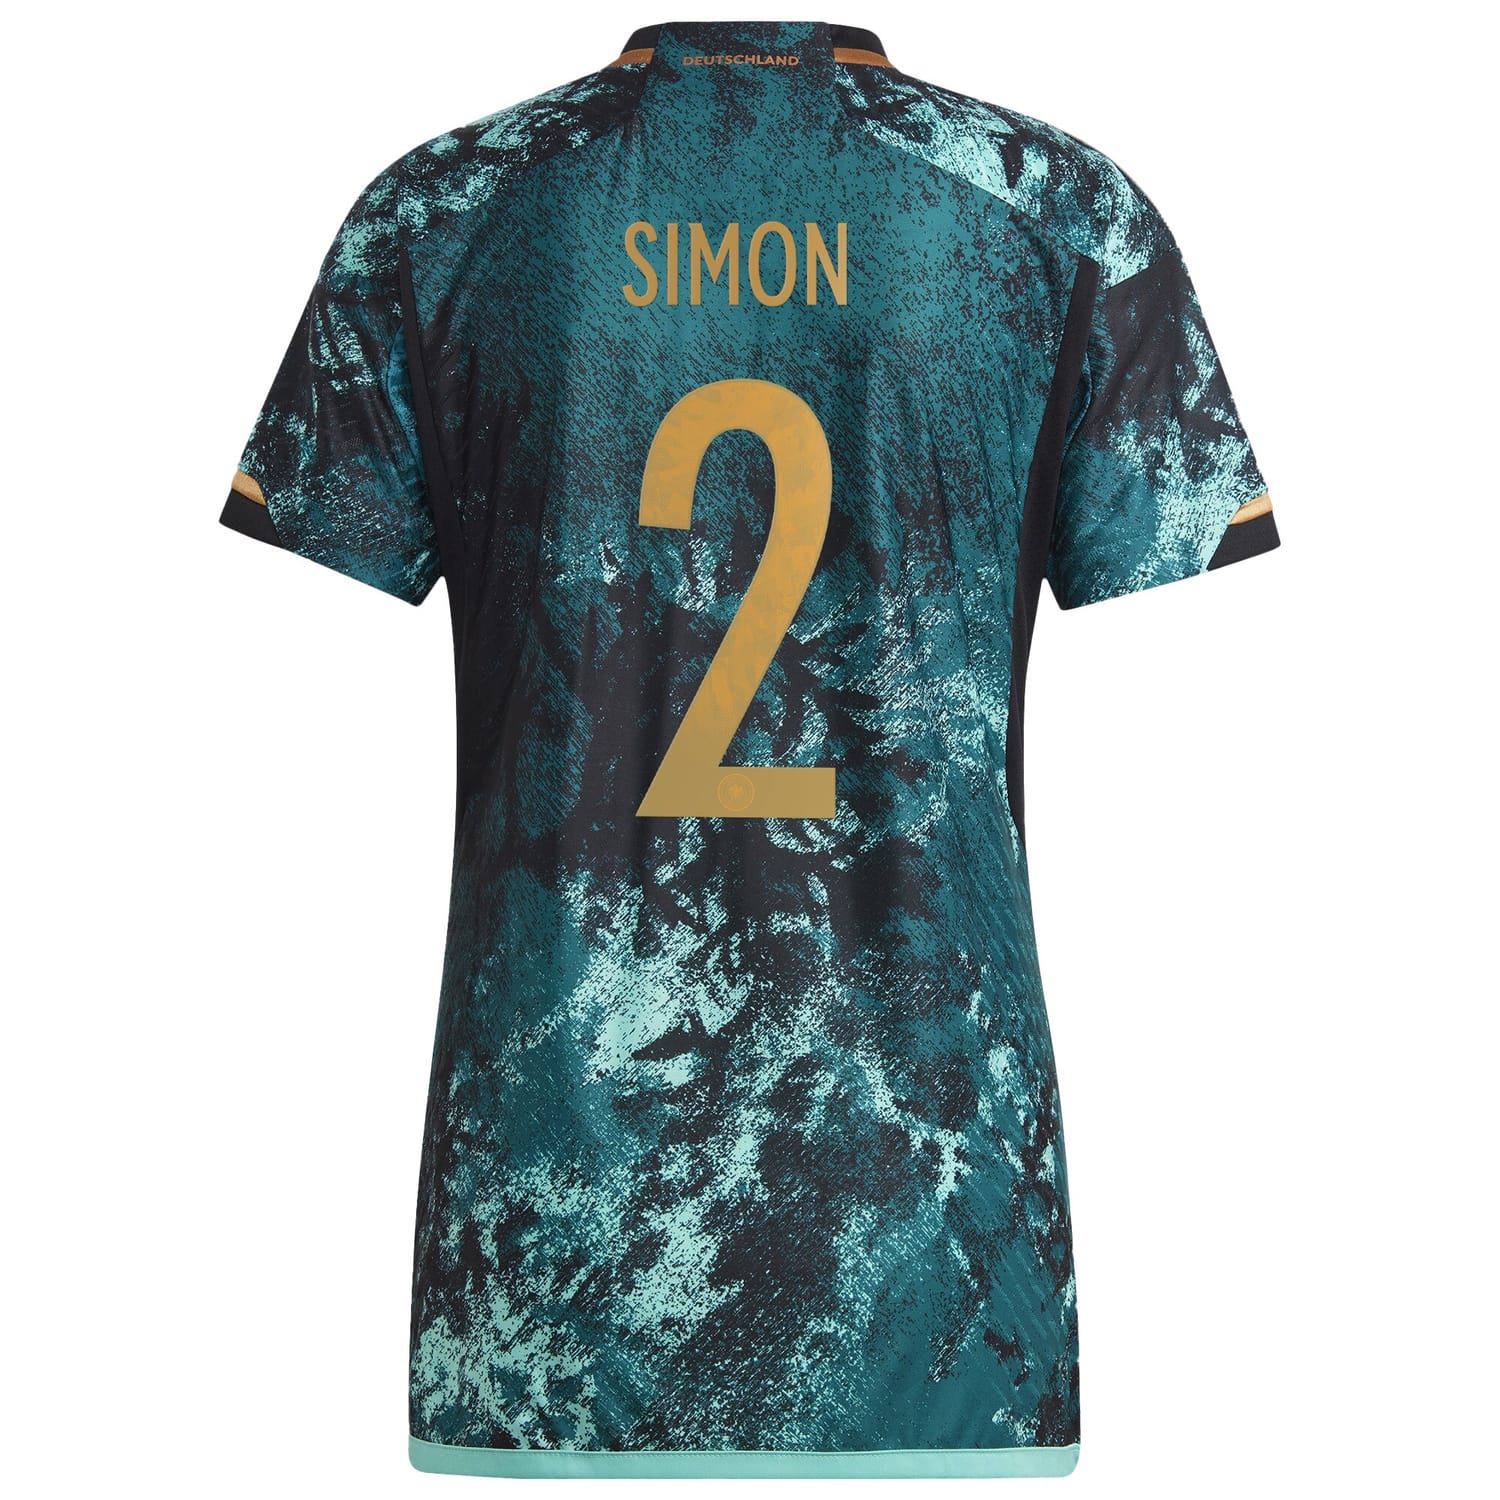 Germany National Team Away Authentic Jersey Shirt 2023 player Simon 2 printing for Women